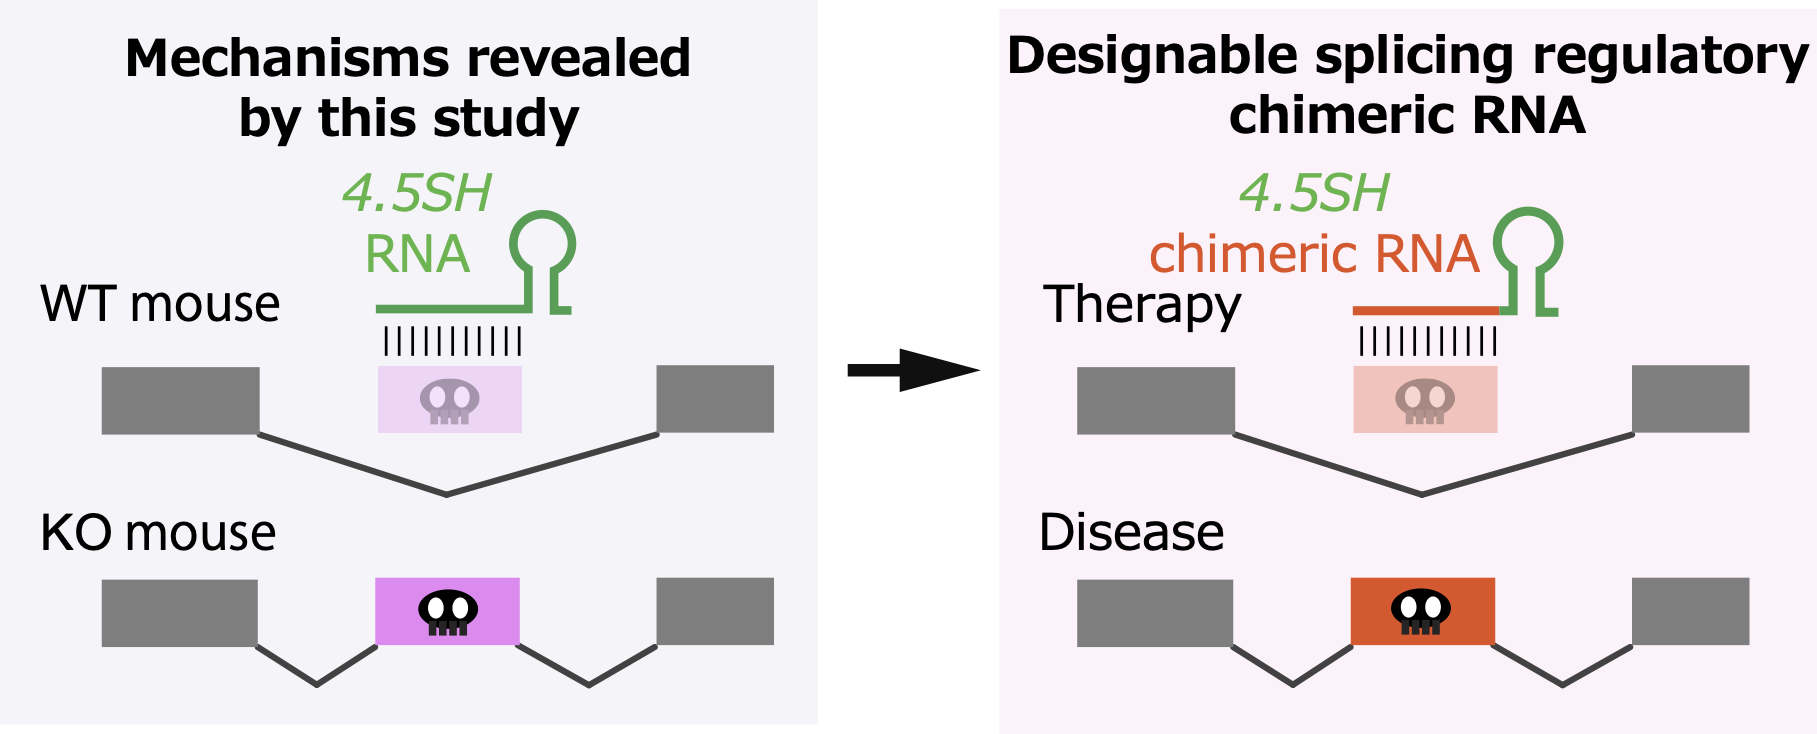 In mice, 4.5SH RNA acts as a natural gene therapy agent, preventing the inclusion of mutations in RNA (left). By engineering recombinant 4.5SH RNA, it may be possible to apply this system to treat genetic diseases in humans (right). (Illustration: Shinichi Nakagawa)